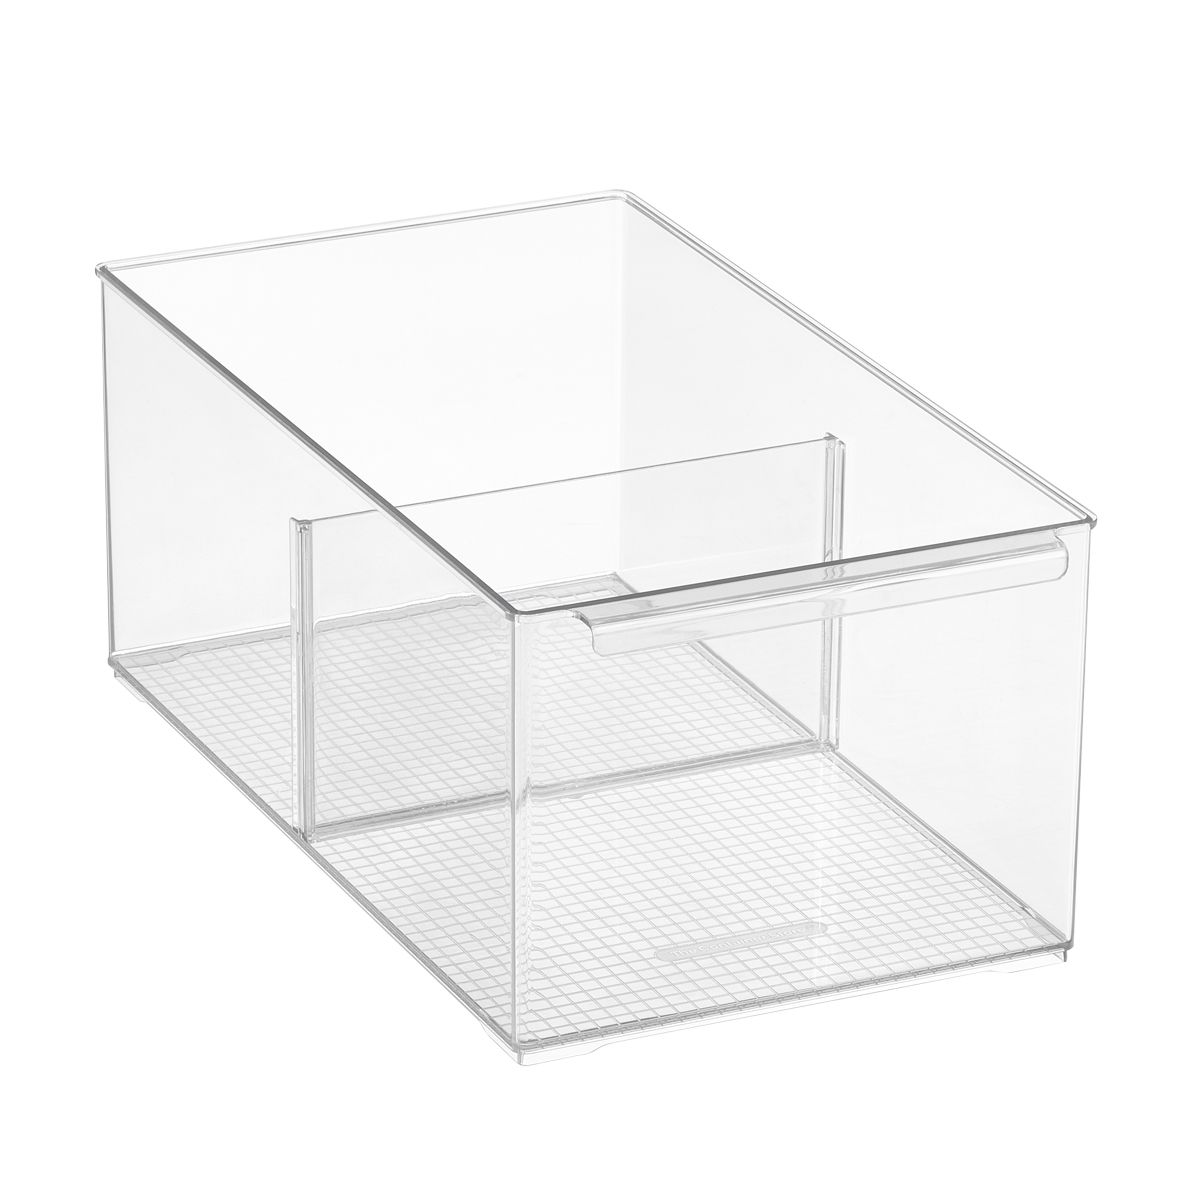 Everything Organizer Large Shelf Depth Pantry Bin w/ Divider Clear | The Container Store